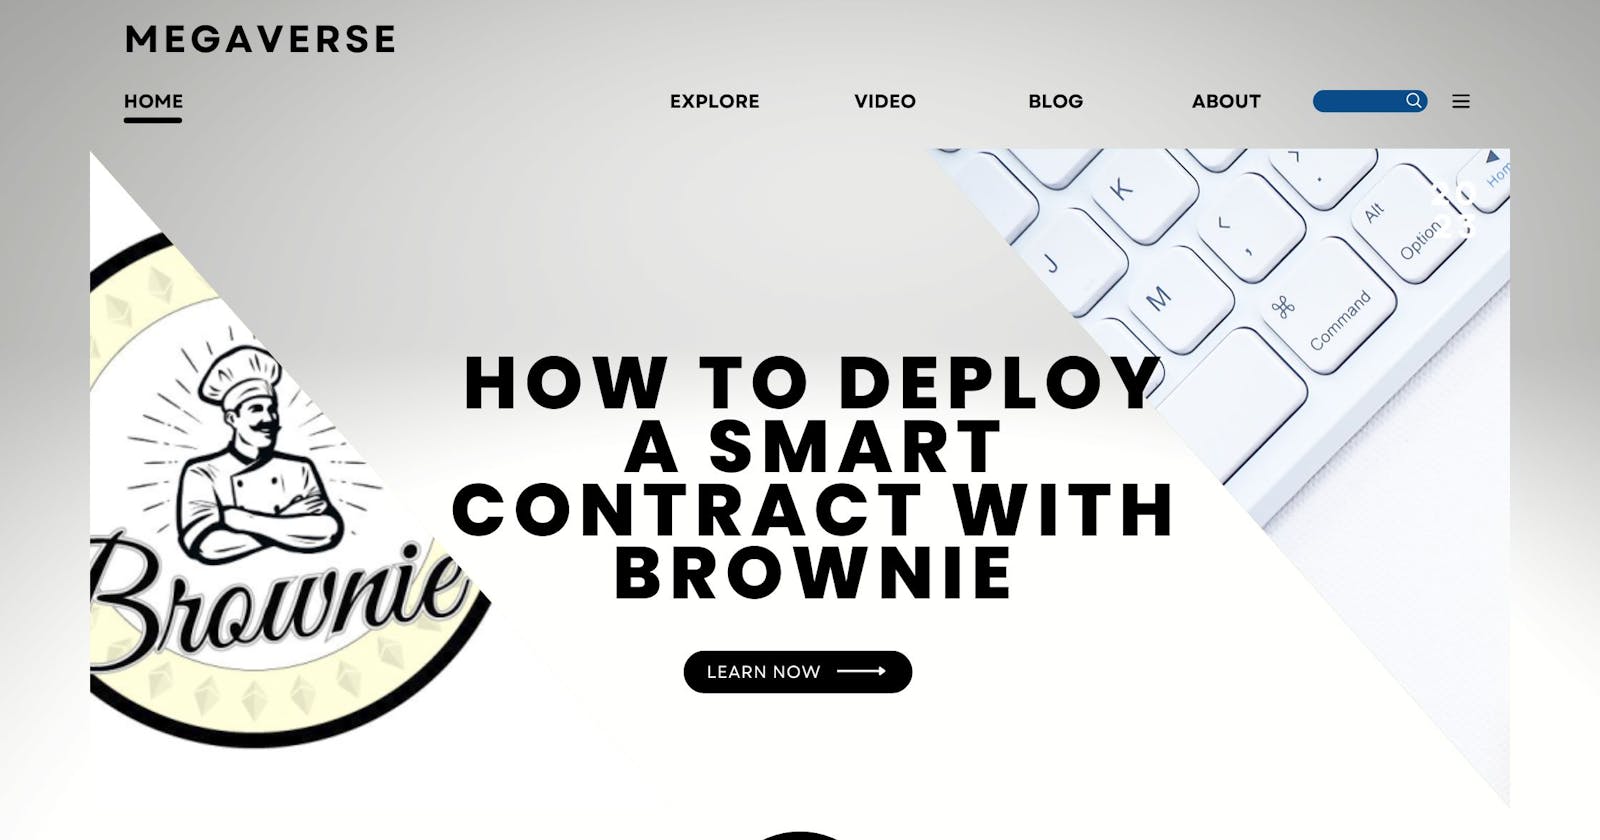 How to deploy a smart contract with Brownie